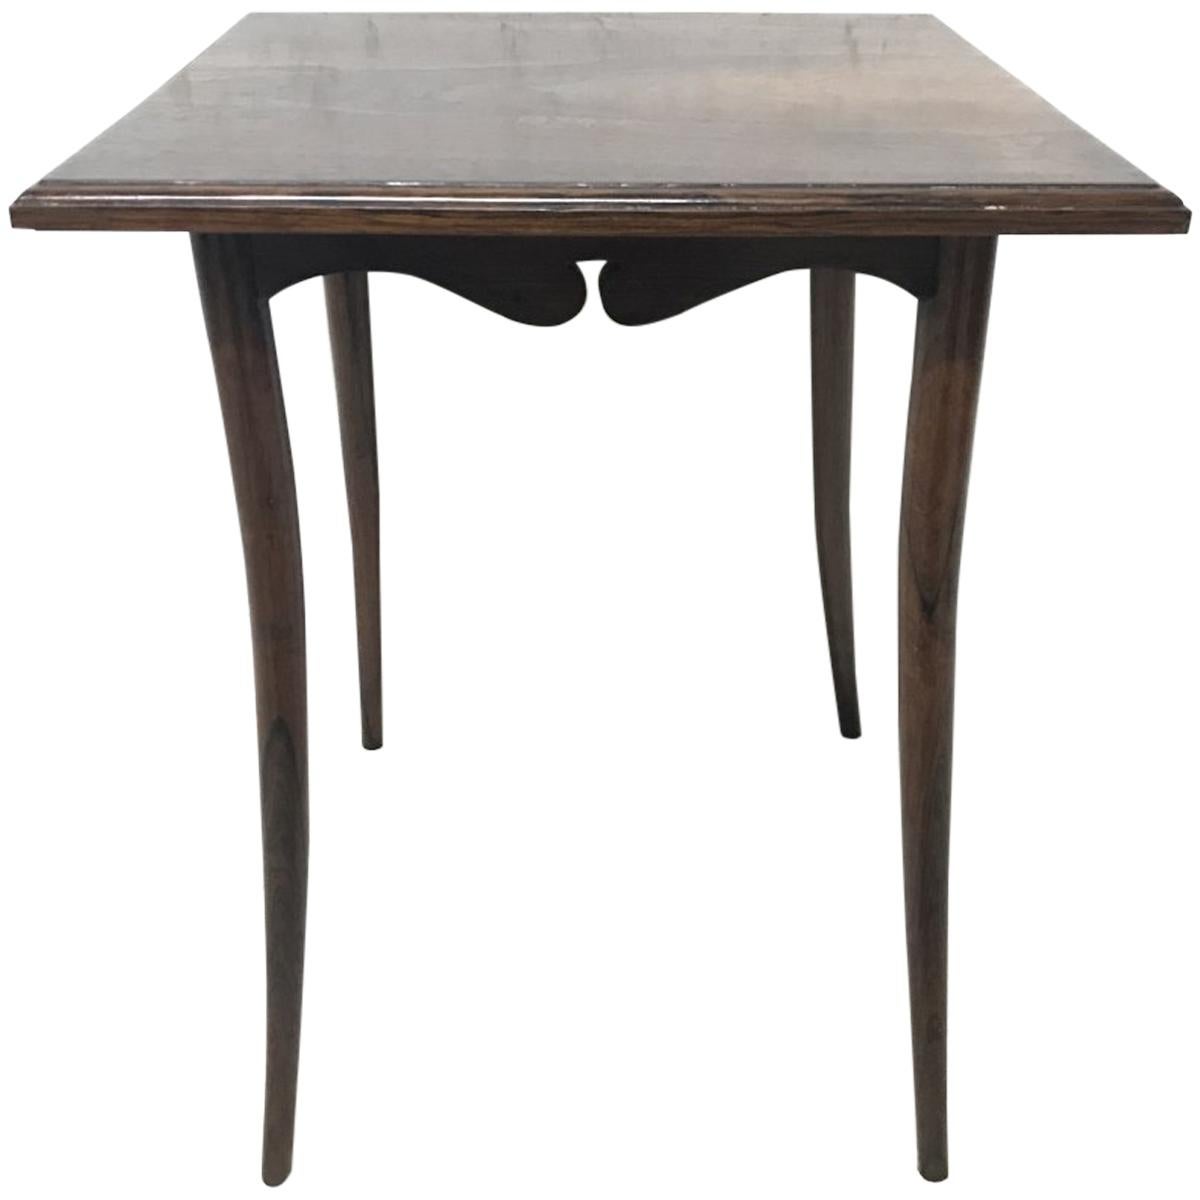 E W Godwin Style, a Petite Anglo-Japanese Rosewood Side Table with Splayed Legs For Sale